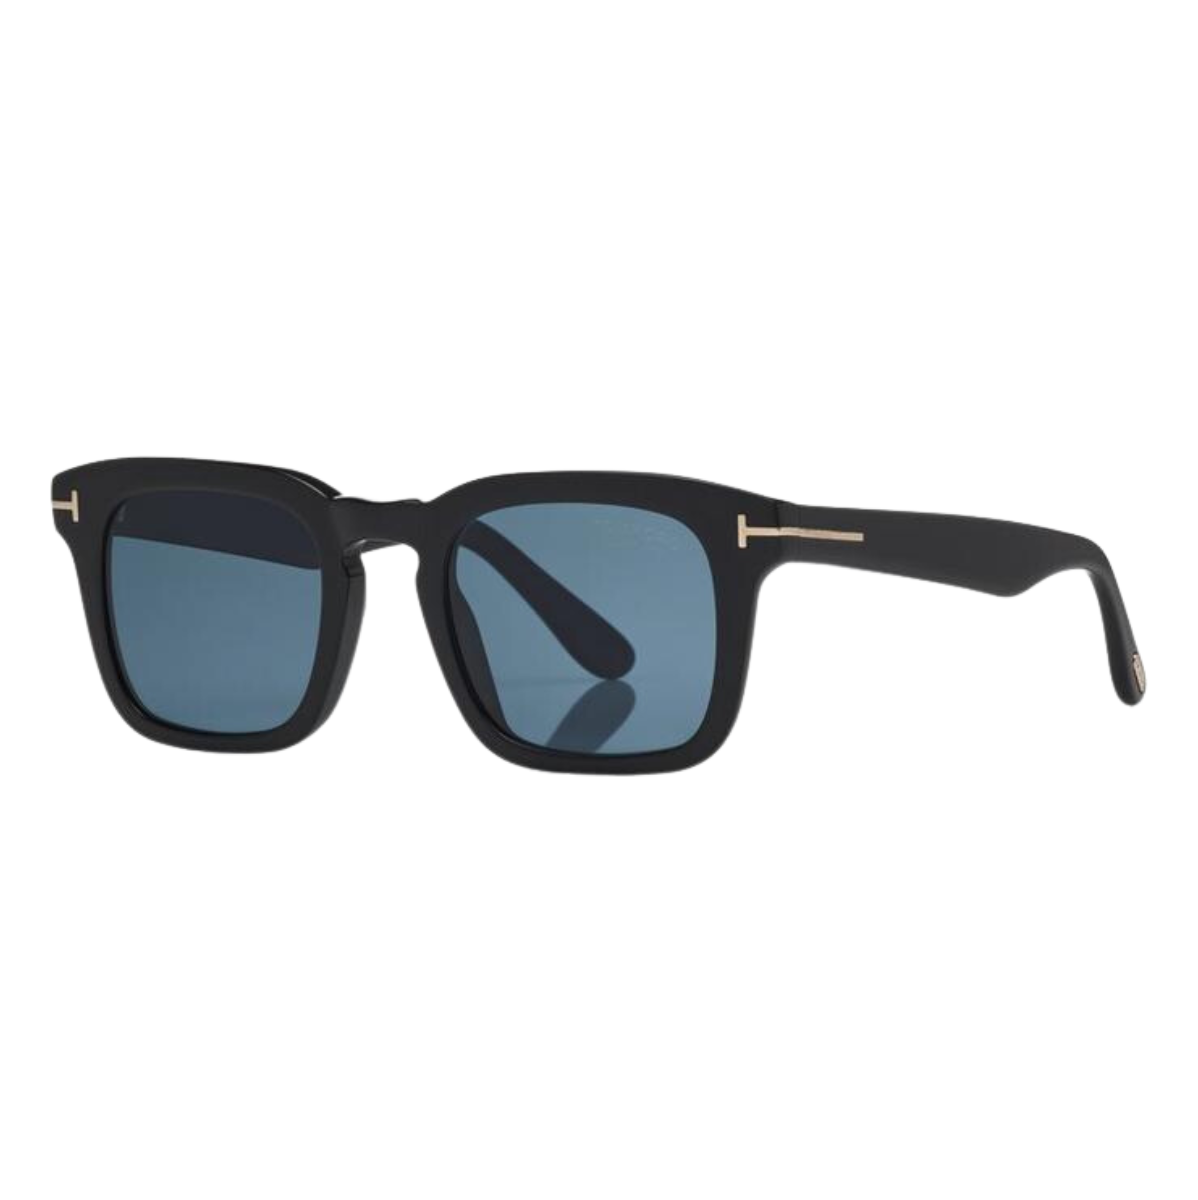  "Tom Ford 751 unisex sunglasses featuring square-shaped acetate frames and polycarbonate lenses in light green and light blue, with temple options in both Havana and black, adding a touch of sophistication to any wardrobe."